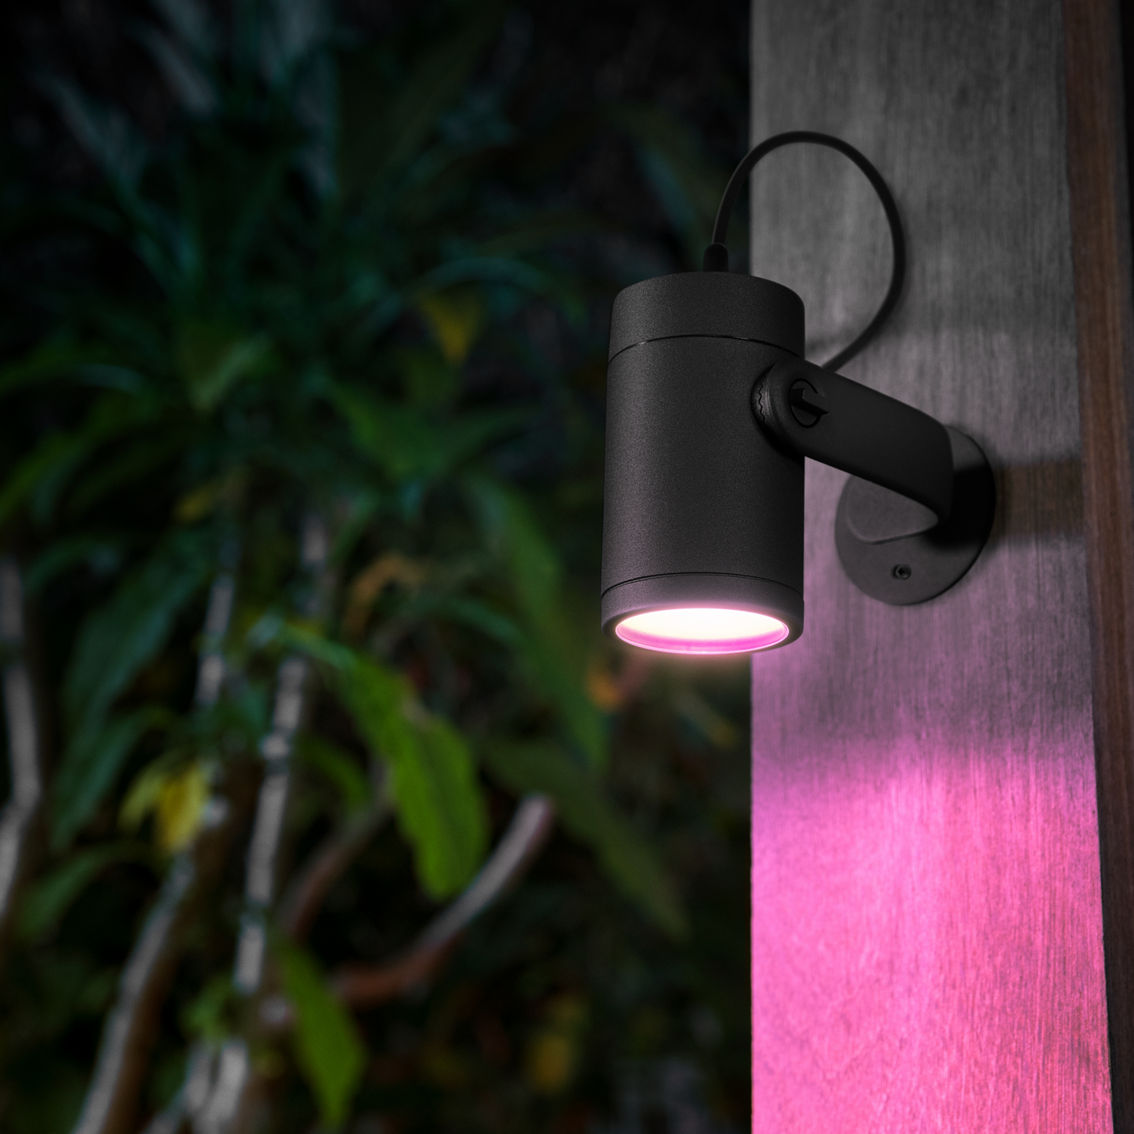 Philips Hue Lily Outdoor Smart Path Light Kit, 3 pk. Low Voltage - Image 7 of 7